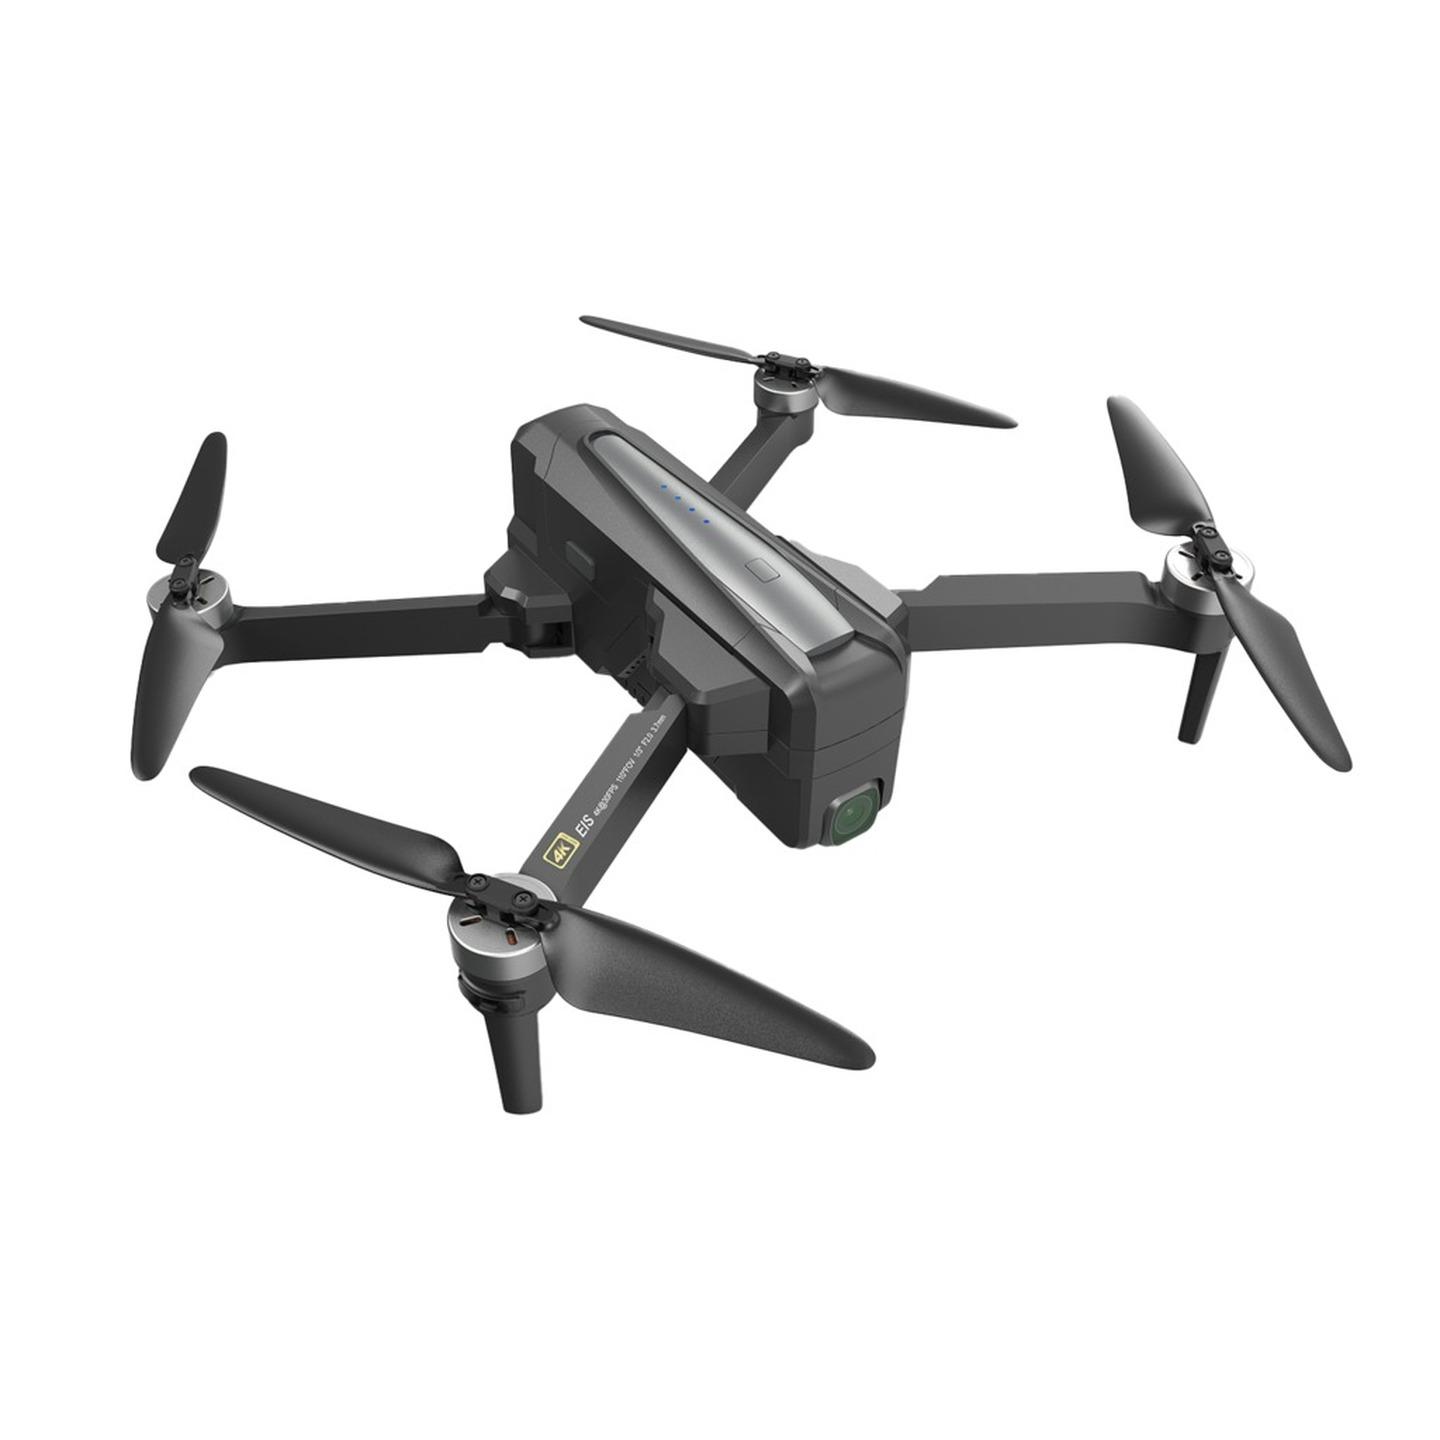 Bugs R/C Foldable Drone with 4K Camera